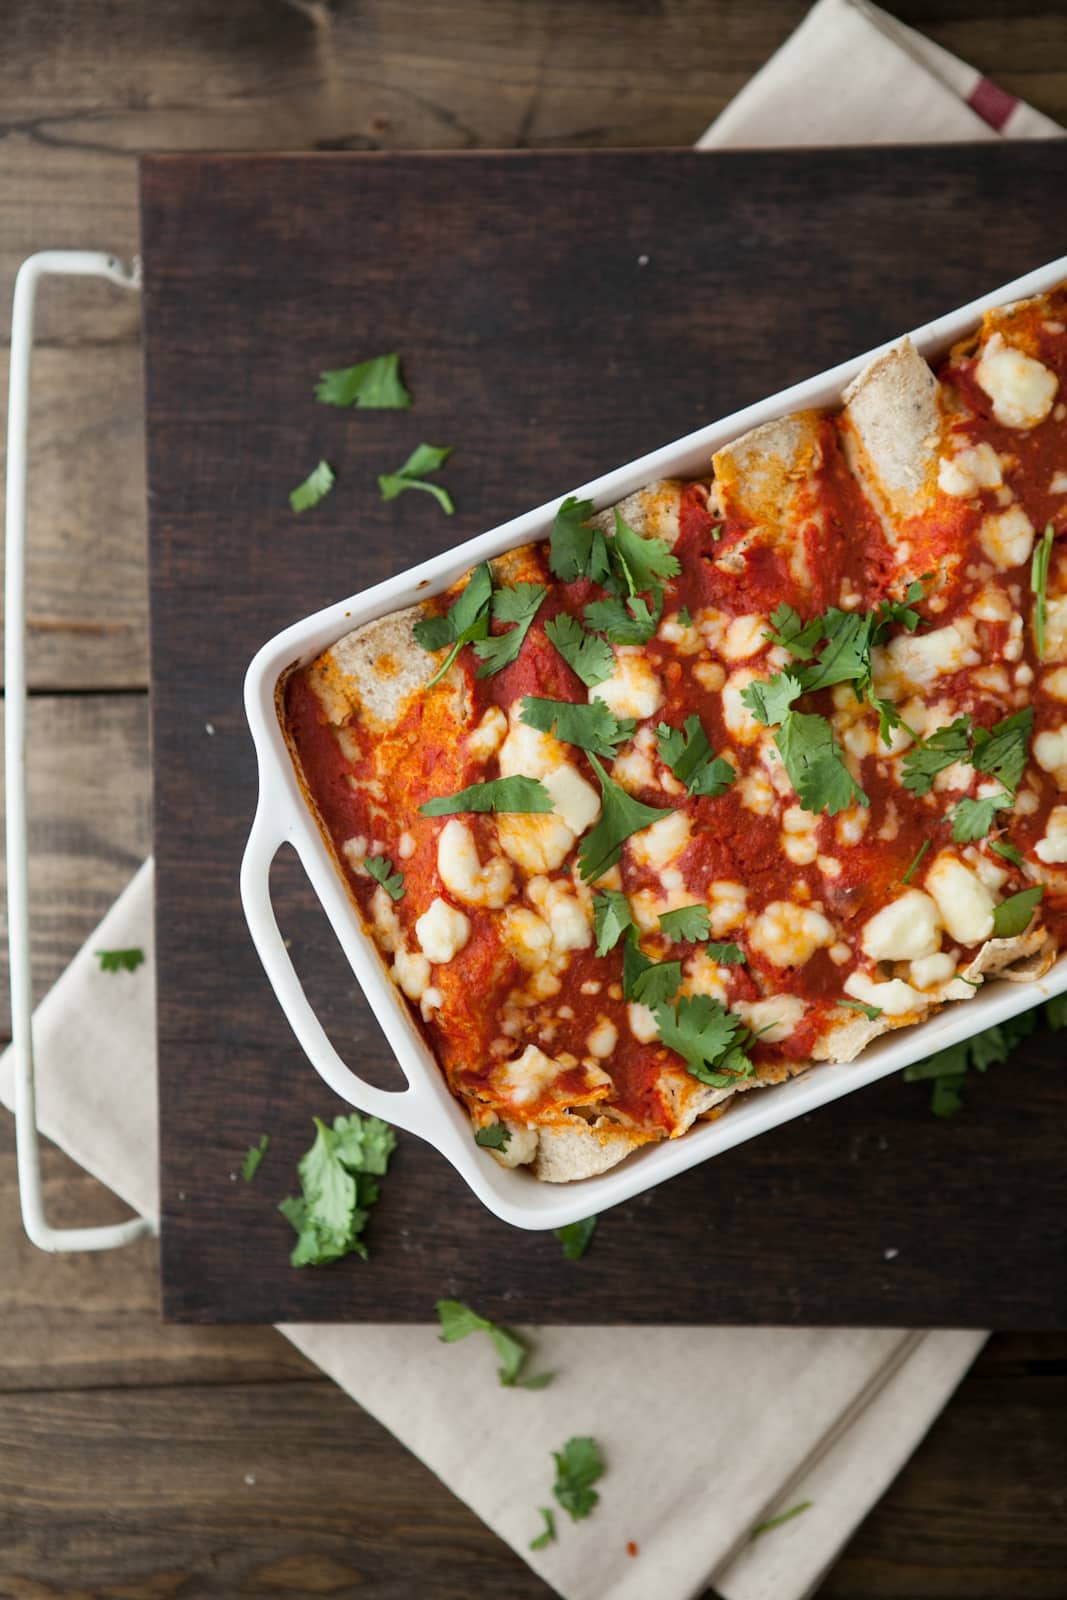 Roasted Corn and Ricotta Enchiladas with Chipotle Tomato Sauce